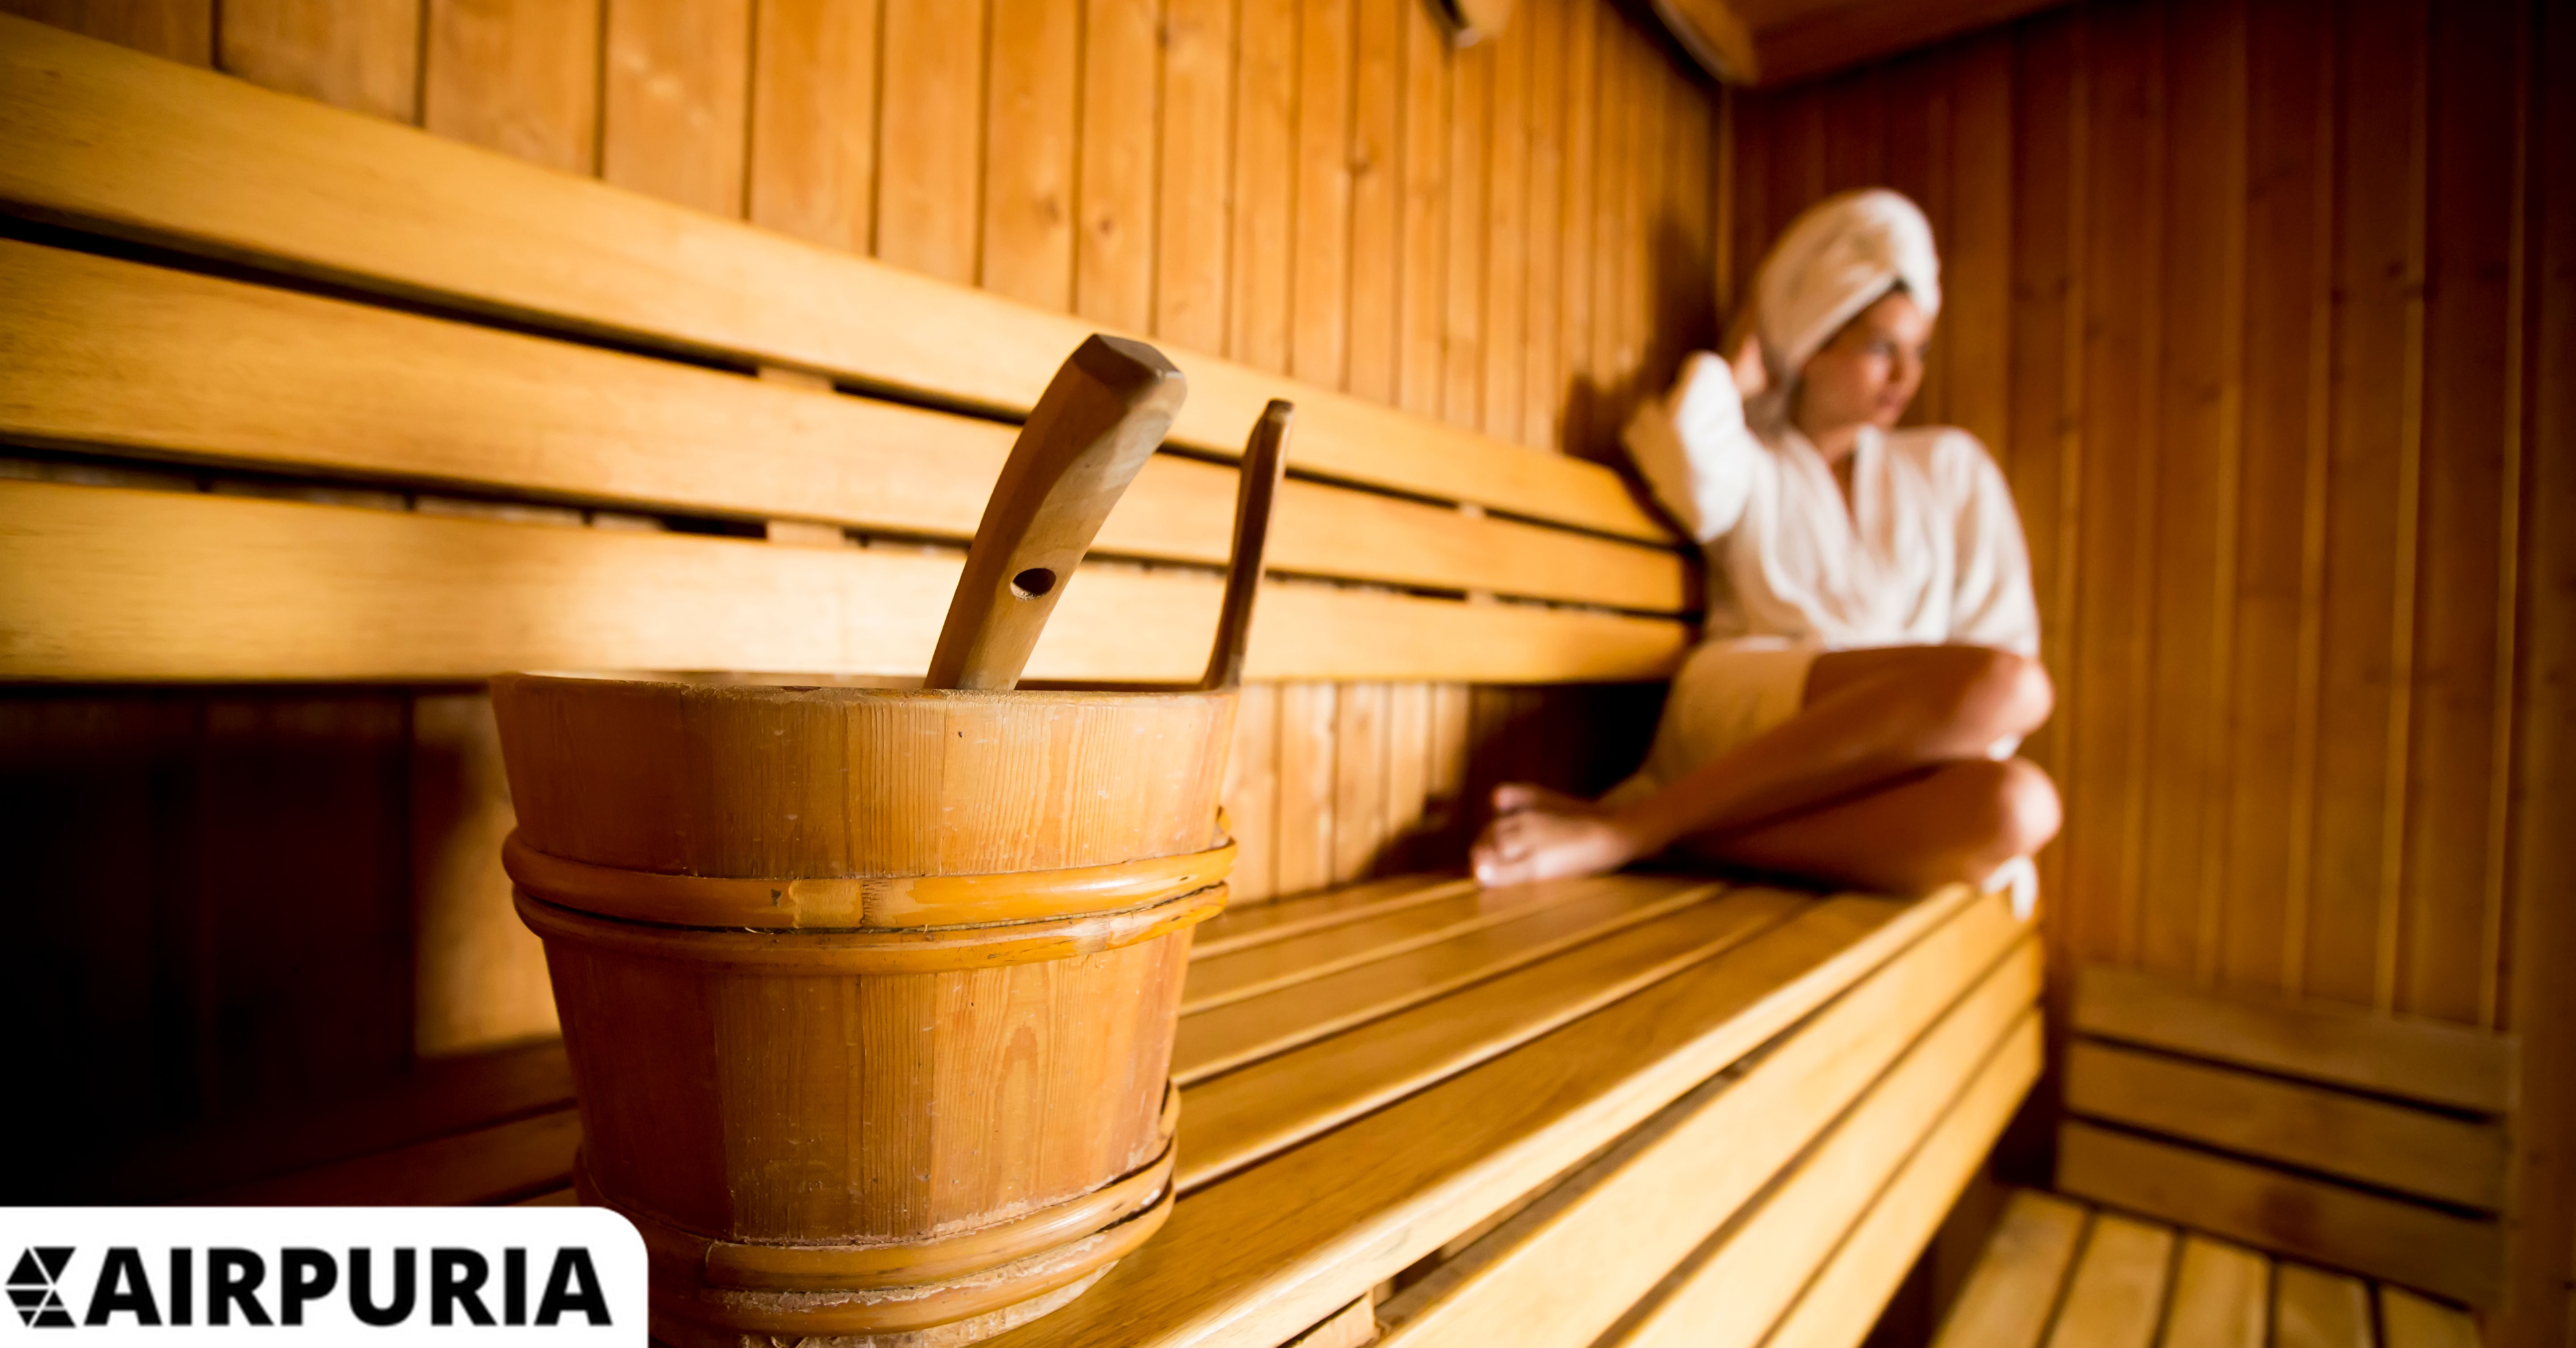 Image of a woman in a sauna thinking about the things to consider when choosing an infrared sauna OR a traditional sauna.